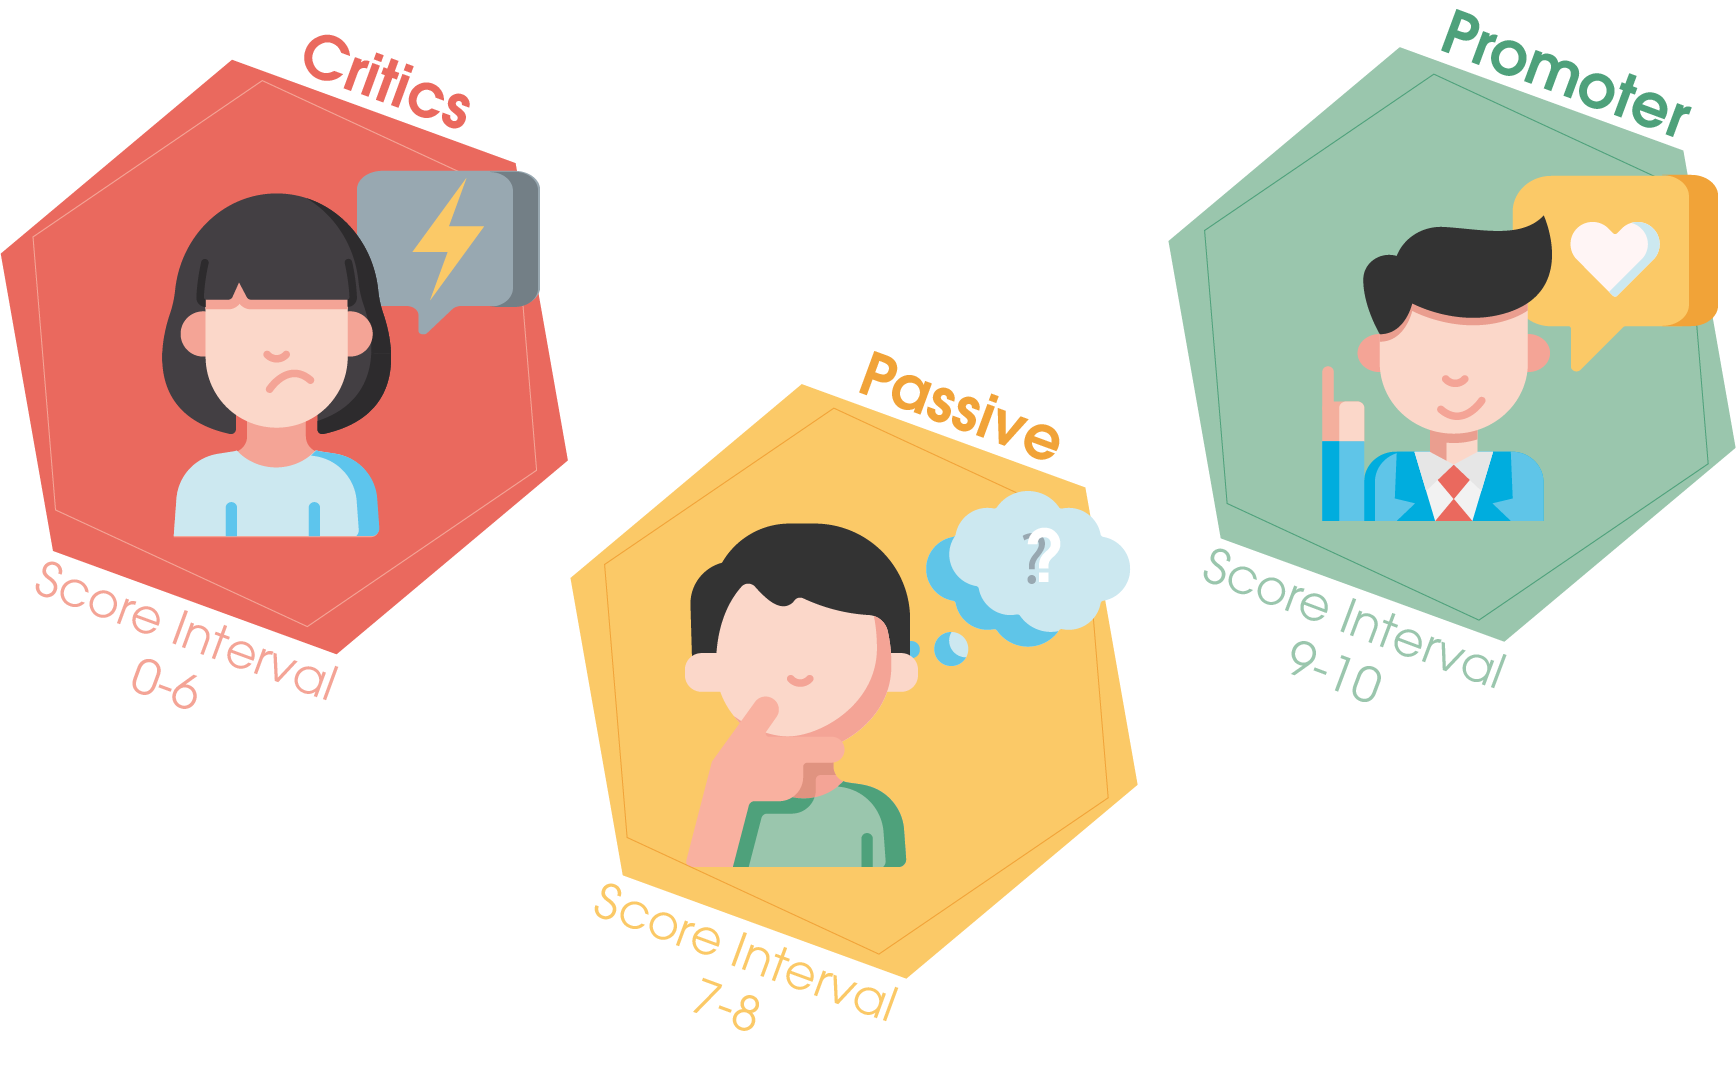 The picture shows the three categories of the Net Promoter Score and which score interval they have.

1. Critics: Score Interval from zero to six
2. Passive: Score Interval seven and eight
3. Promoter: Score Interval nine and ten